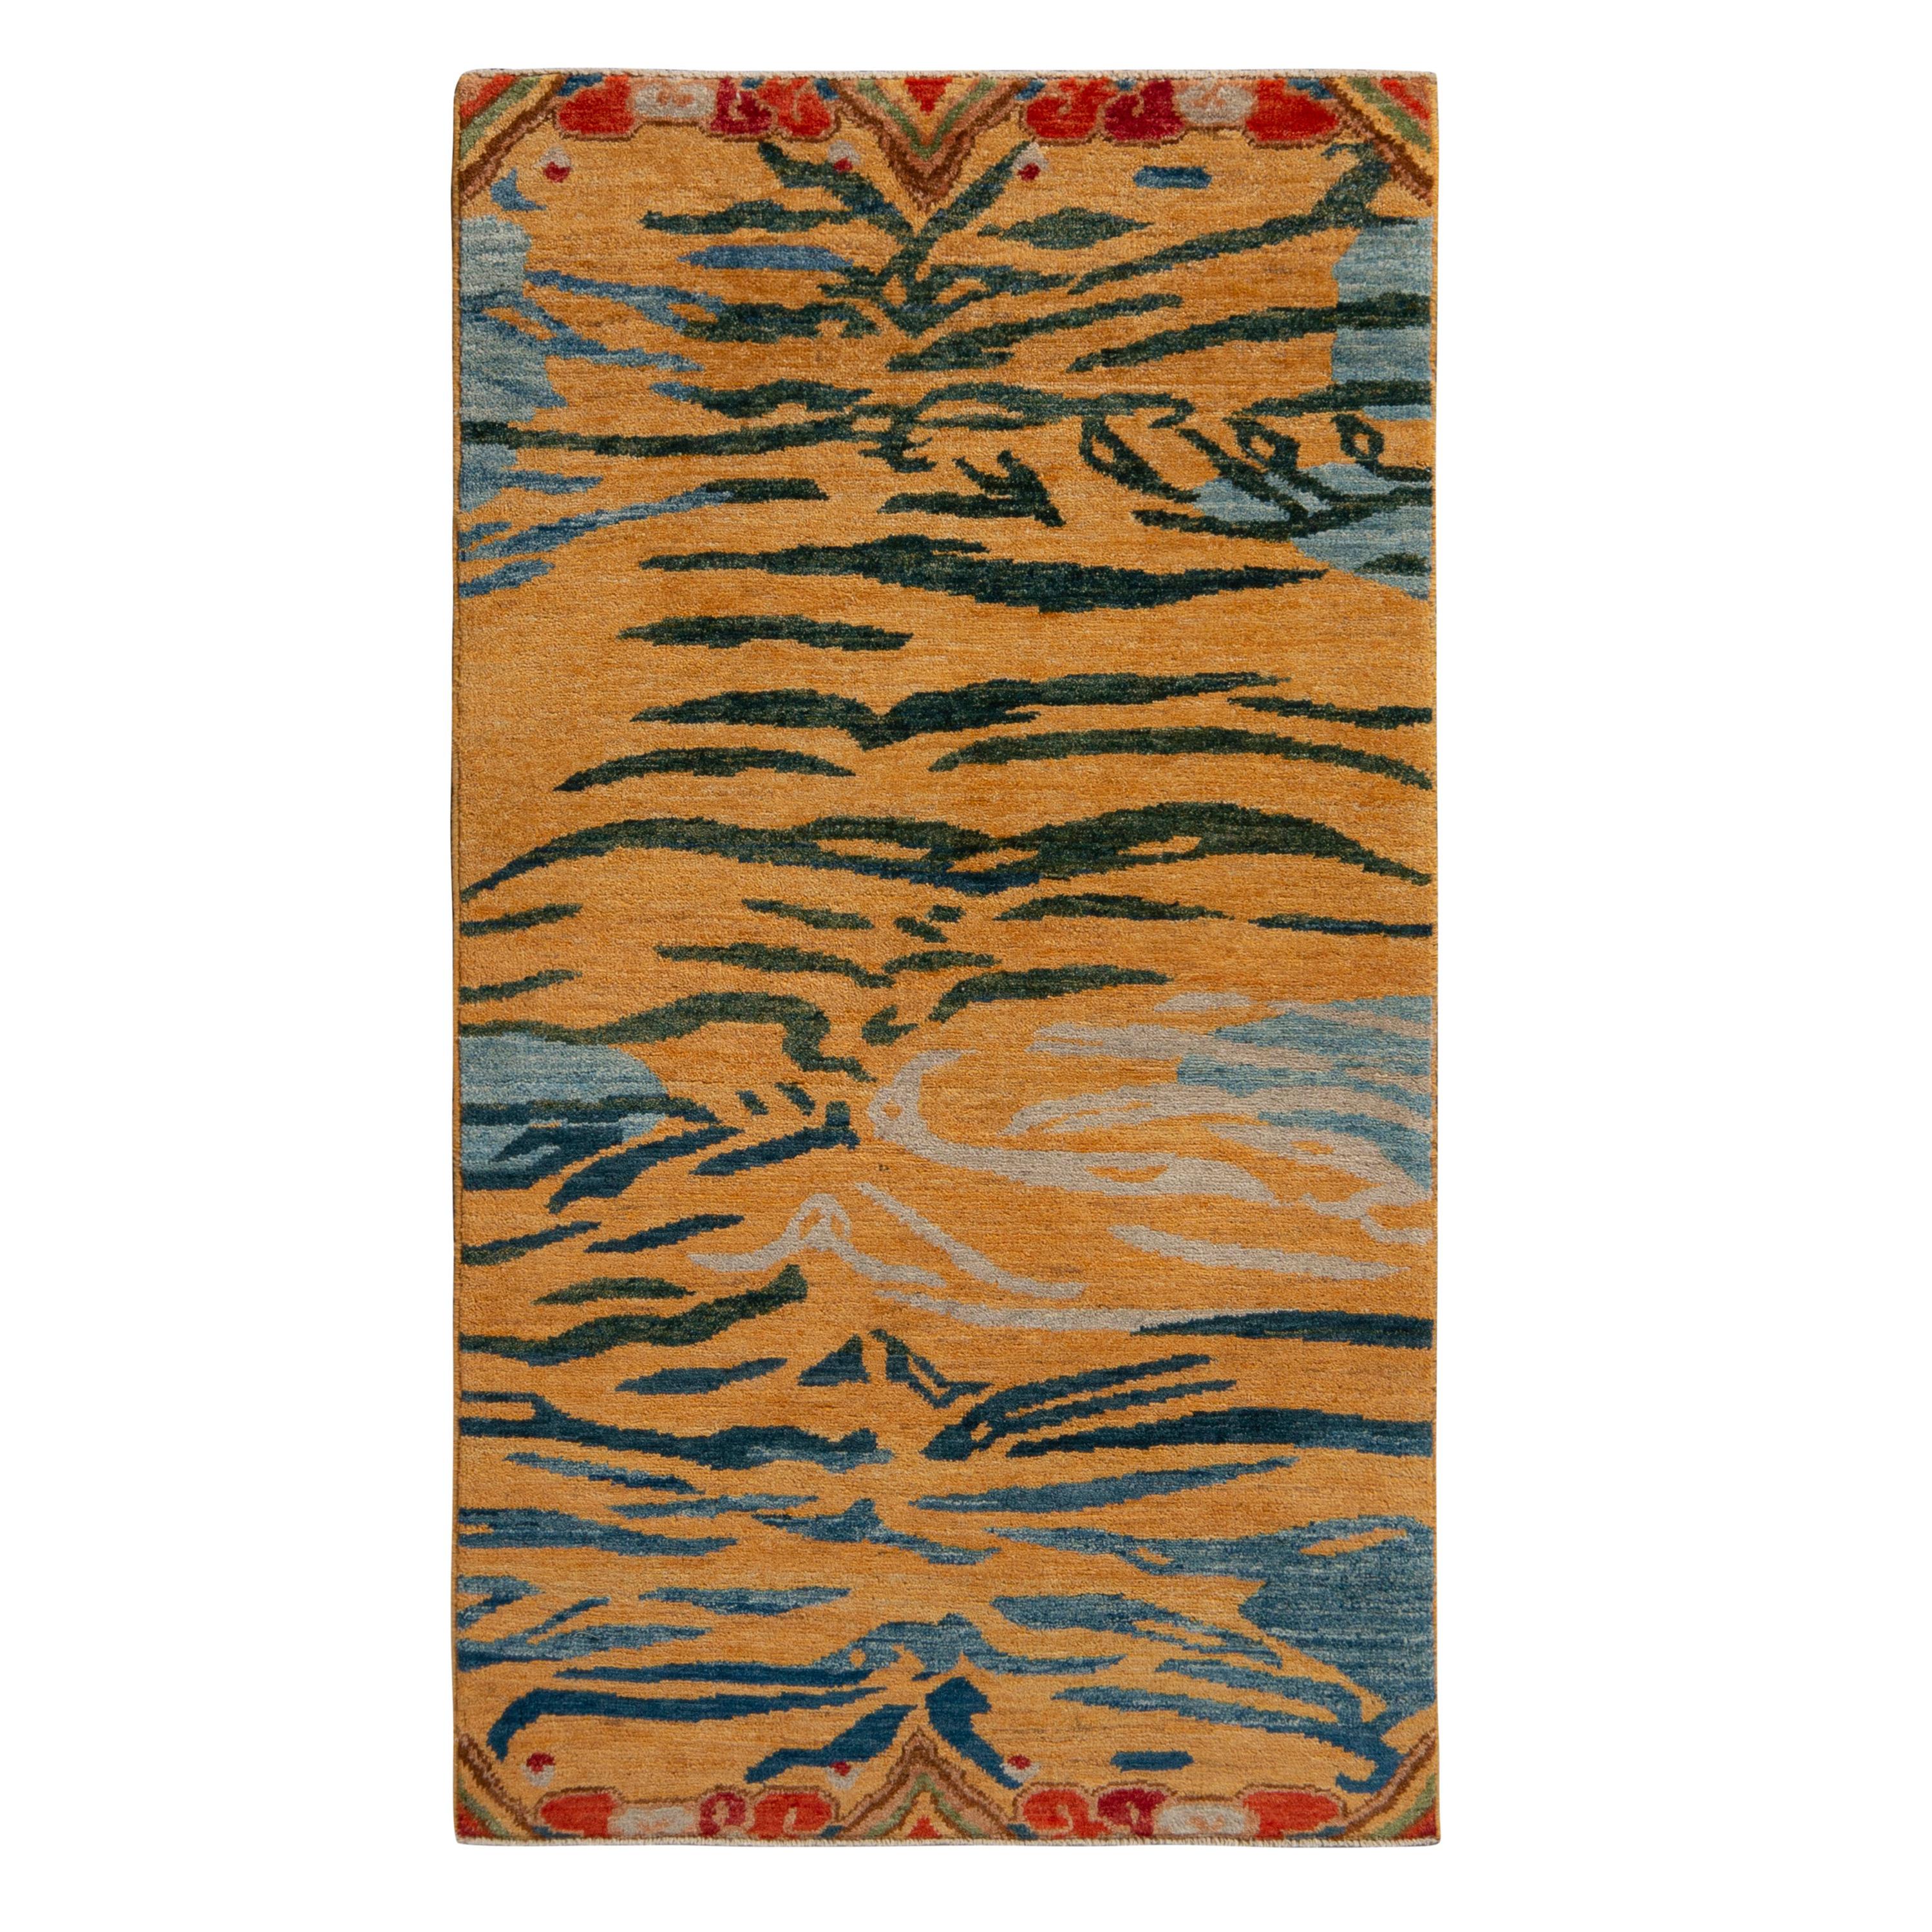 Rug & Kilim’s Classic Style Tiger Rug in Orange and Blue Abstract Stripe Pattern For Sale